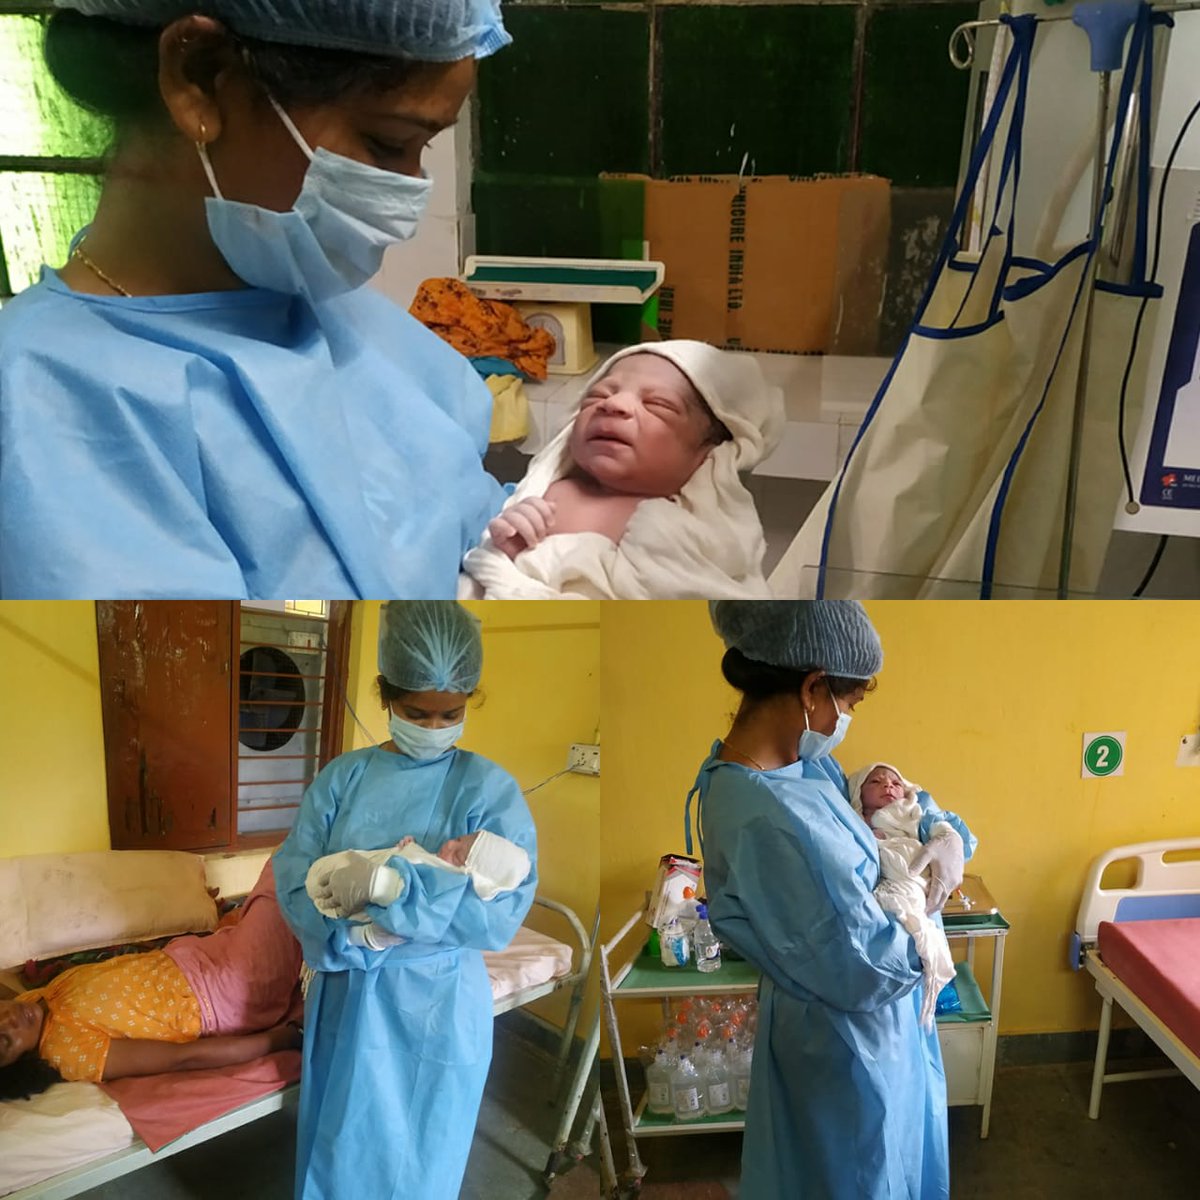 #InstitutionalDelivery conducted at Pondum HWC PHC @DantewadaDist at 16:45 PM, both the mother and child are healthy.
#Kudos to our #Nurse & her team for caring and helping them other to have a #SafeDelivery 

@MoHFW_INDIA
#AB_HealthAndWellnessCentre
@drharshvardhan
@NITIAayog